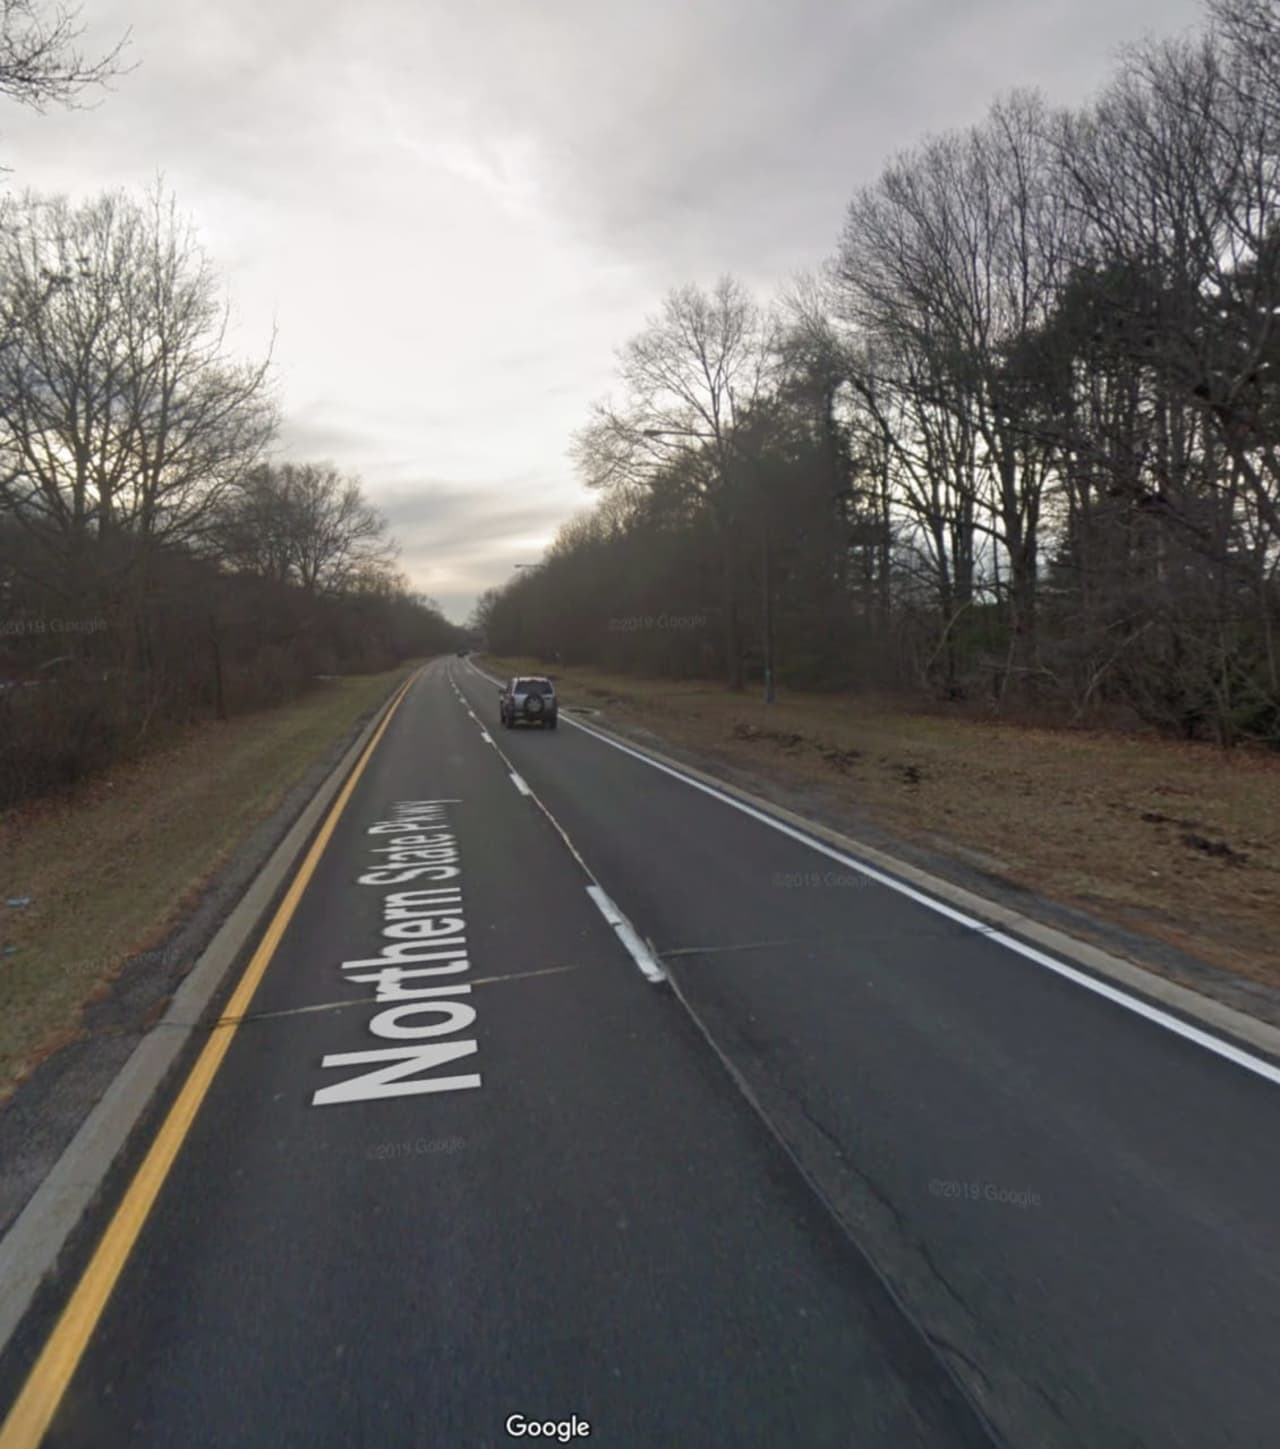 A live cat was thrown from a moving vehicle on Northern State Parkway between exit 40 and exit 41.